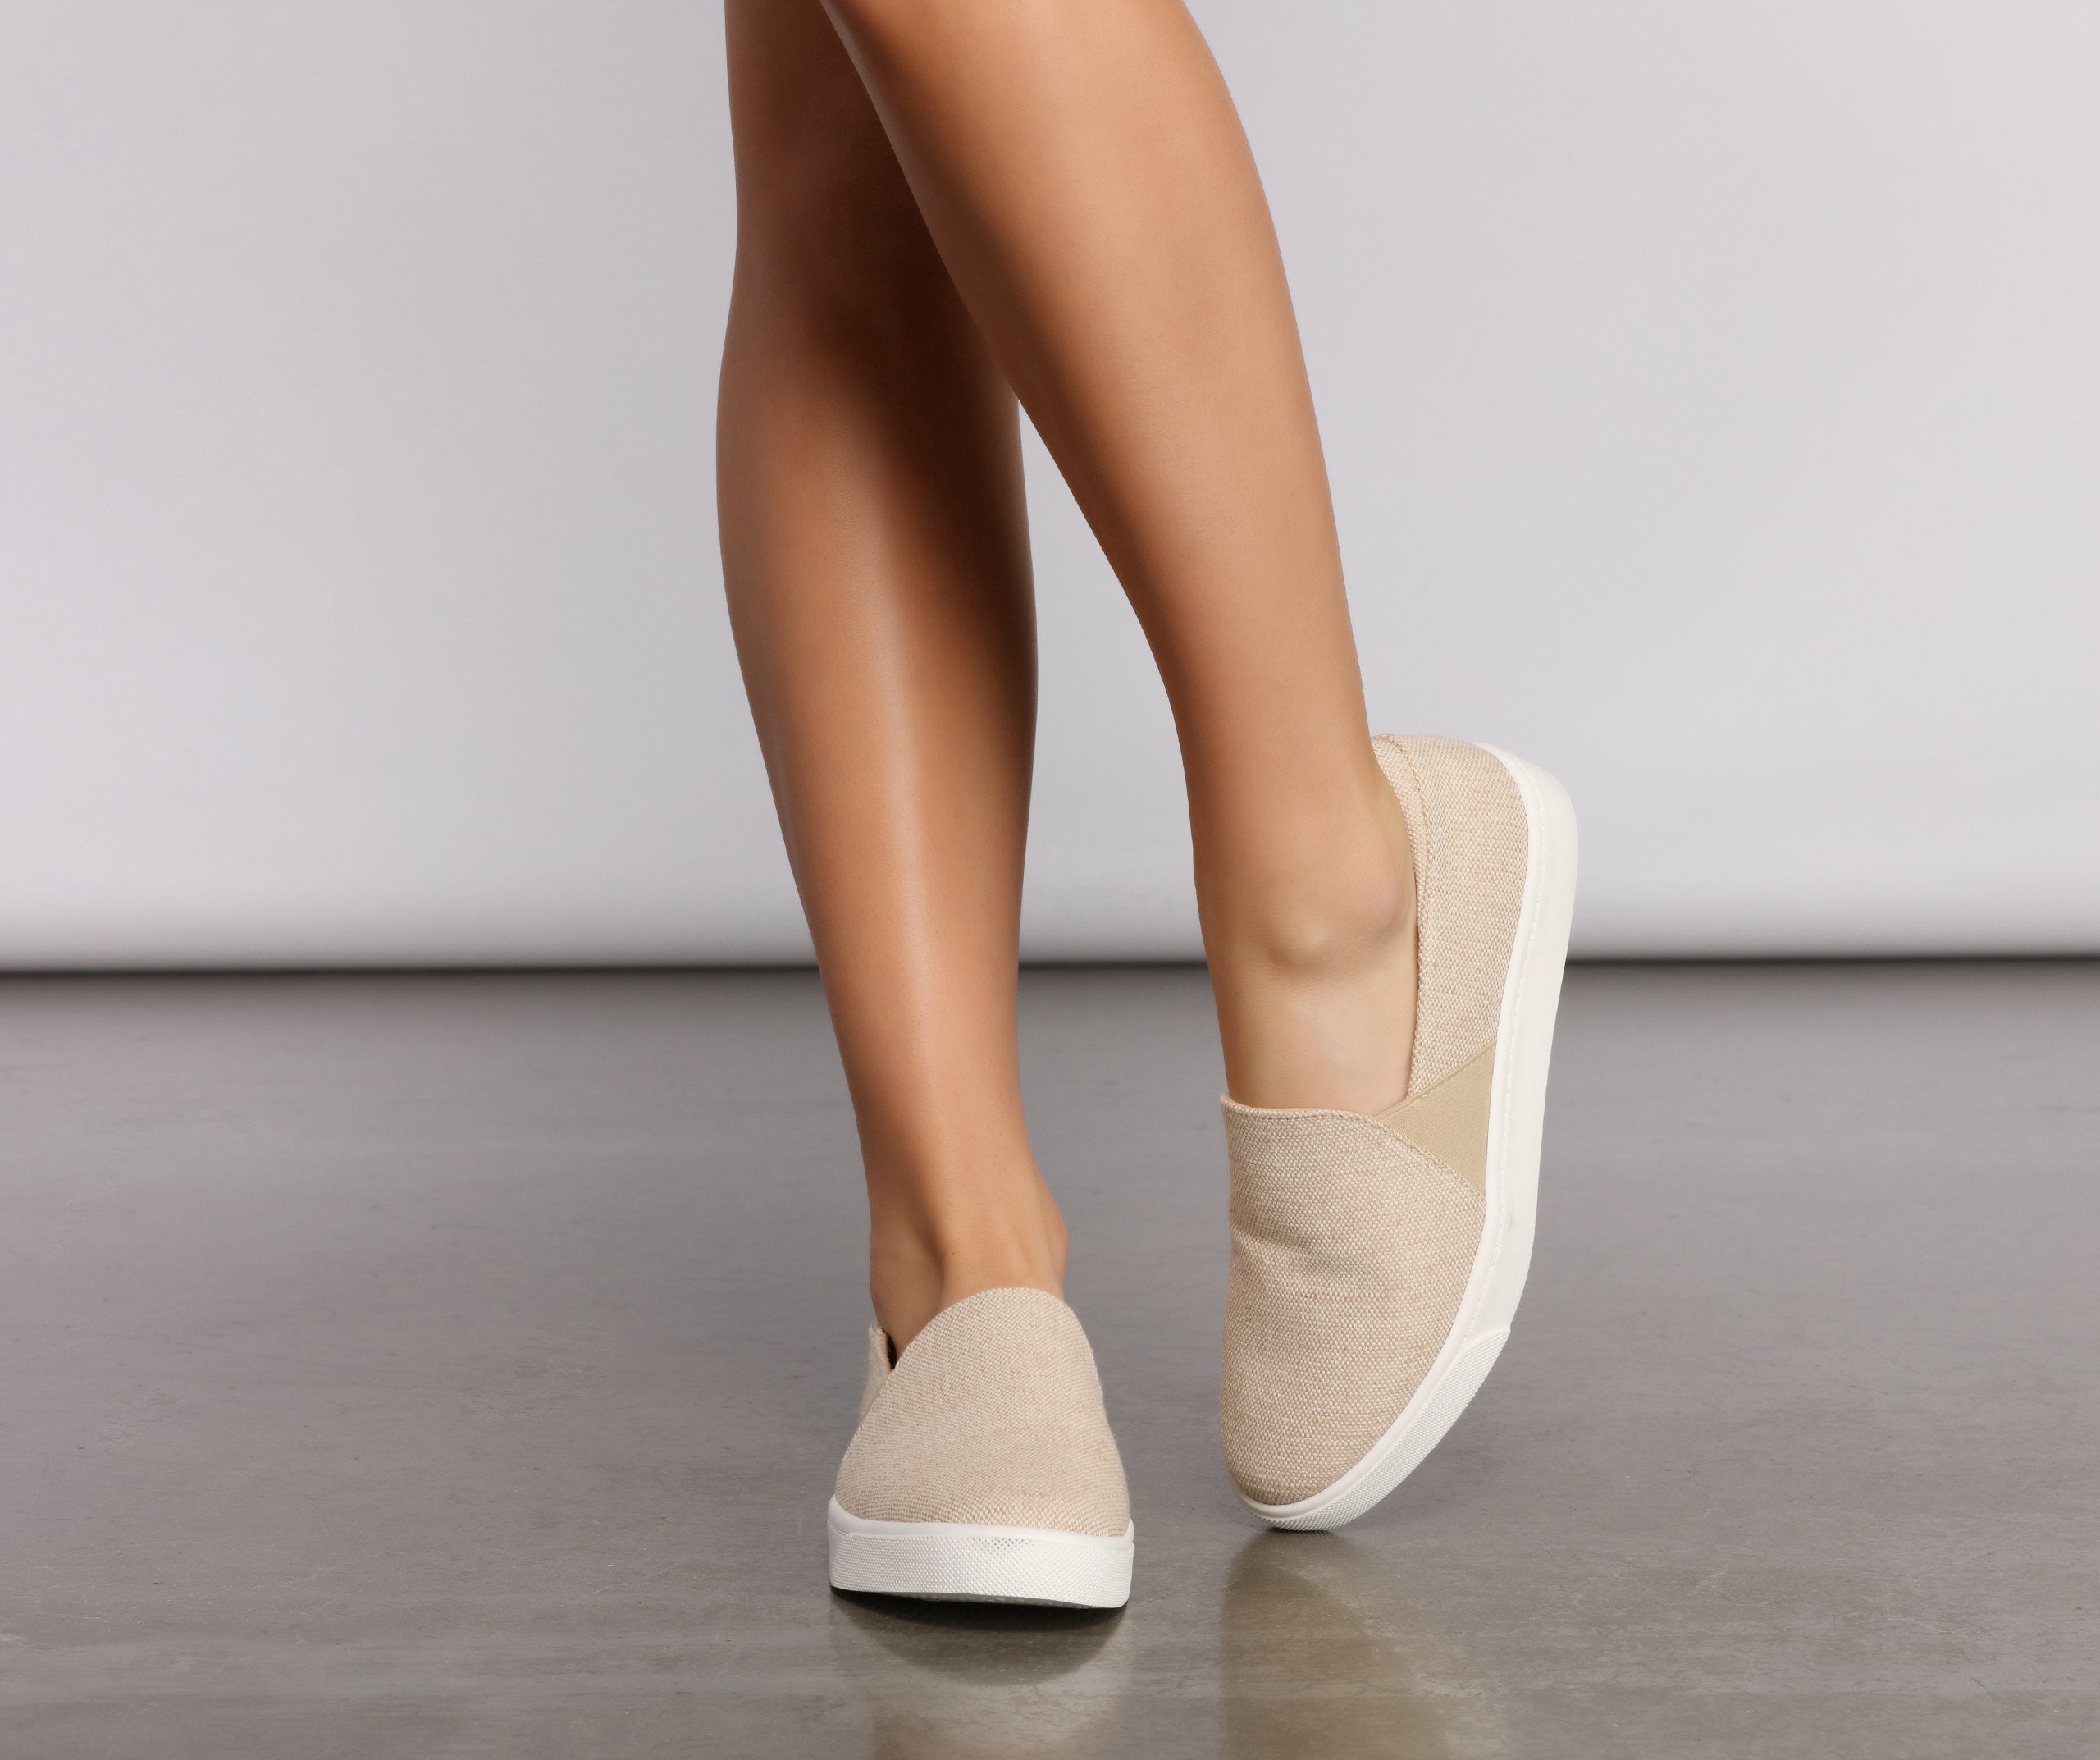 Casually Cute Slip On Sneakers - Lady Occasions